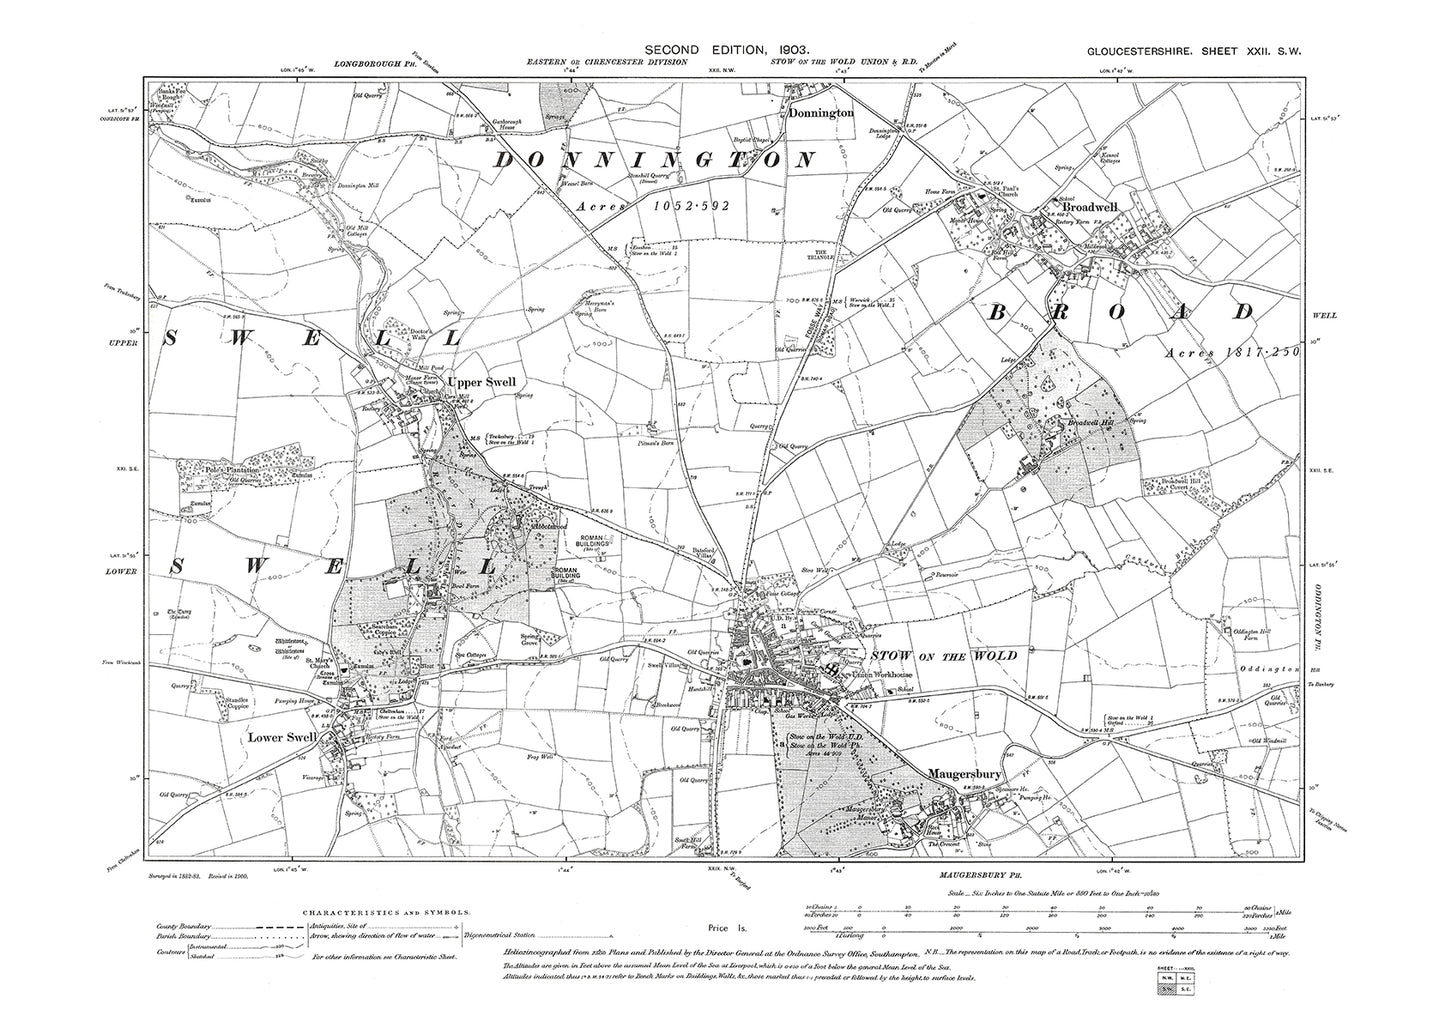 Old OS map dated 1903, showing Donnington (south), Broadwell, Swell, Stow on the Wold, Maugersbury in Gloucestershire - 22SW